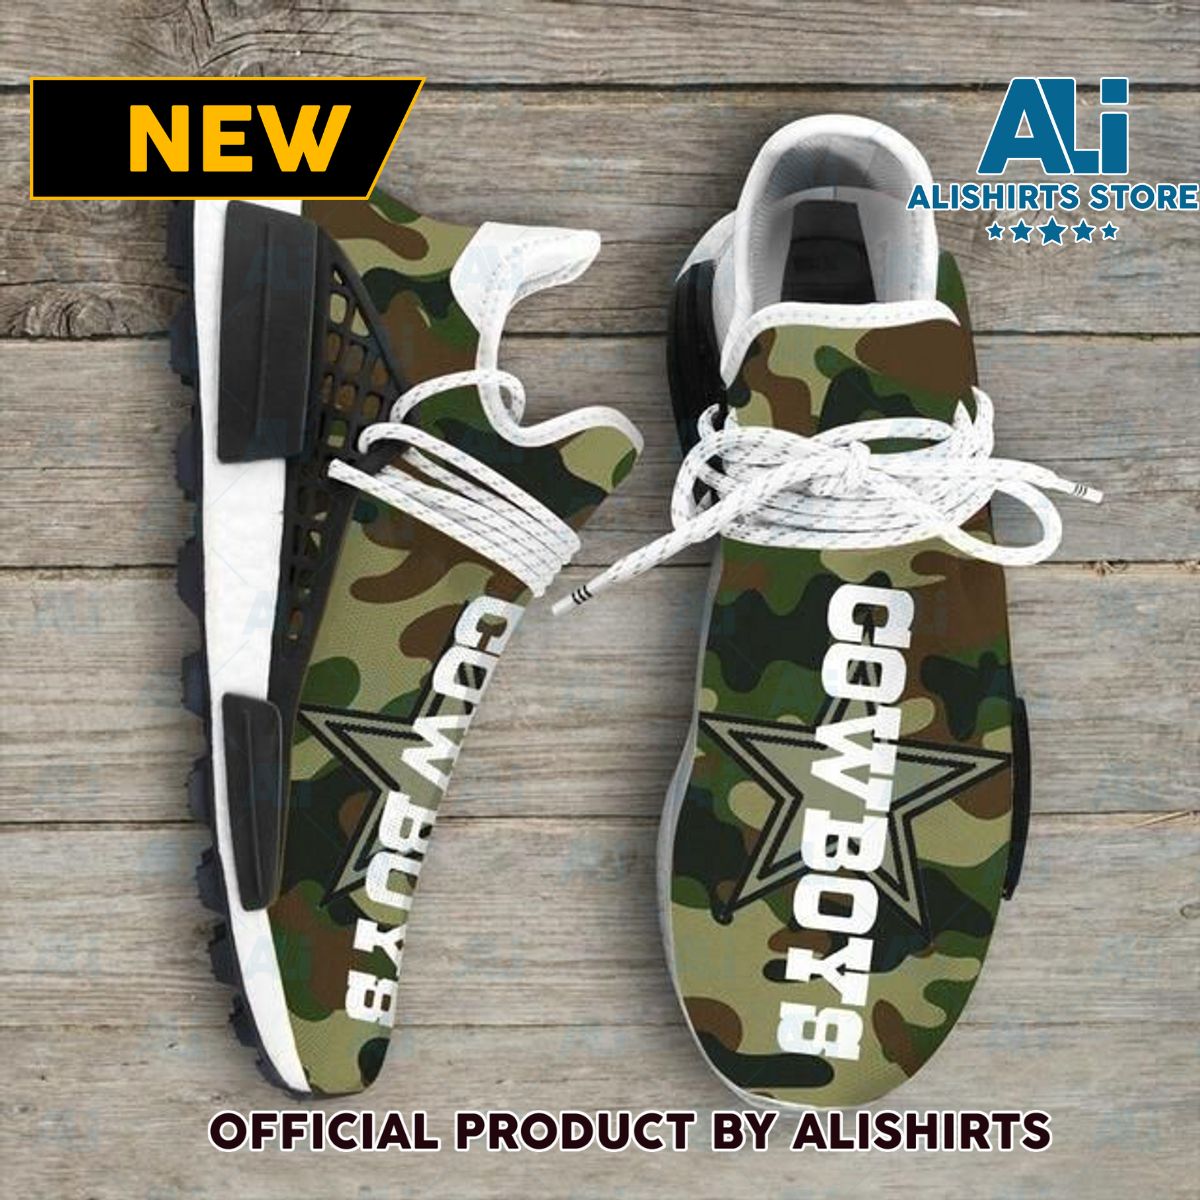 Camo Camouflage Dallas Cowboy Nfl NMD Human Race shoes